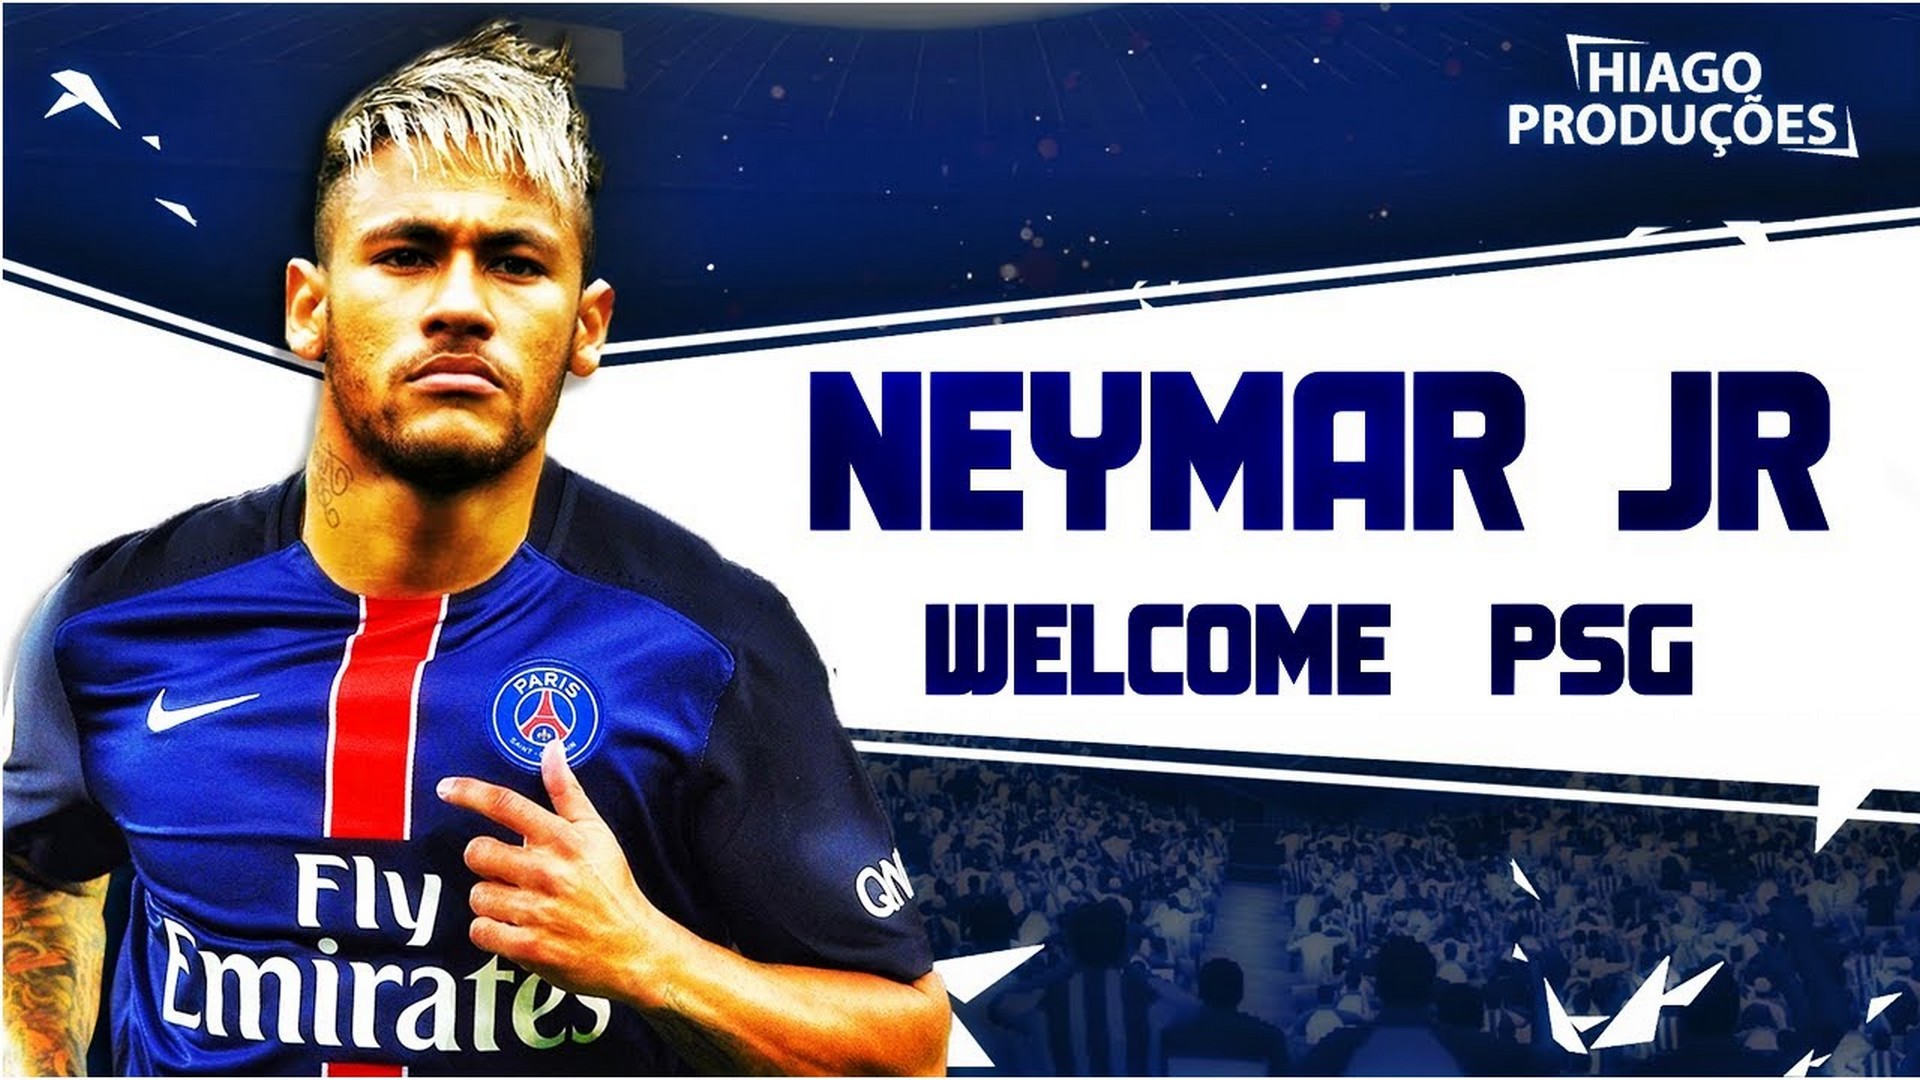 Neymar PSG Wallpaper with image resolution 1920x1080 pixel. You can use this wallpaper as background for your desktop Computer Screensavers, Android or iPhone smartphones